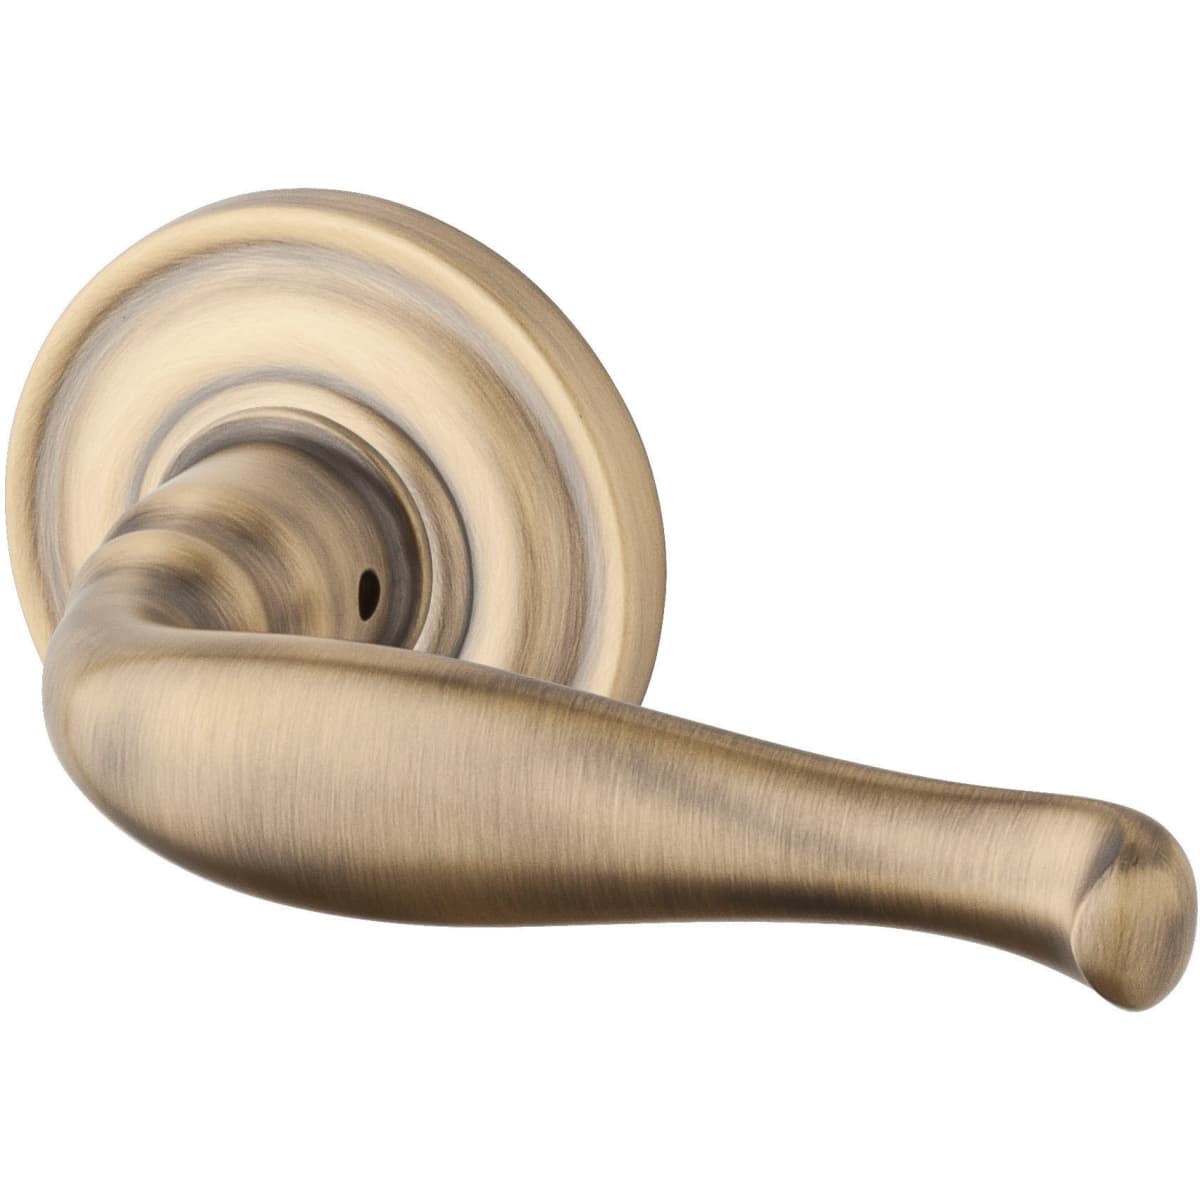 Baldwin PVDECTRR049 Reserve Privacy Decorative with Traditional Round Rose Matte Brass & Black Finish